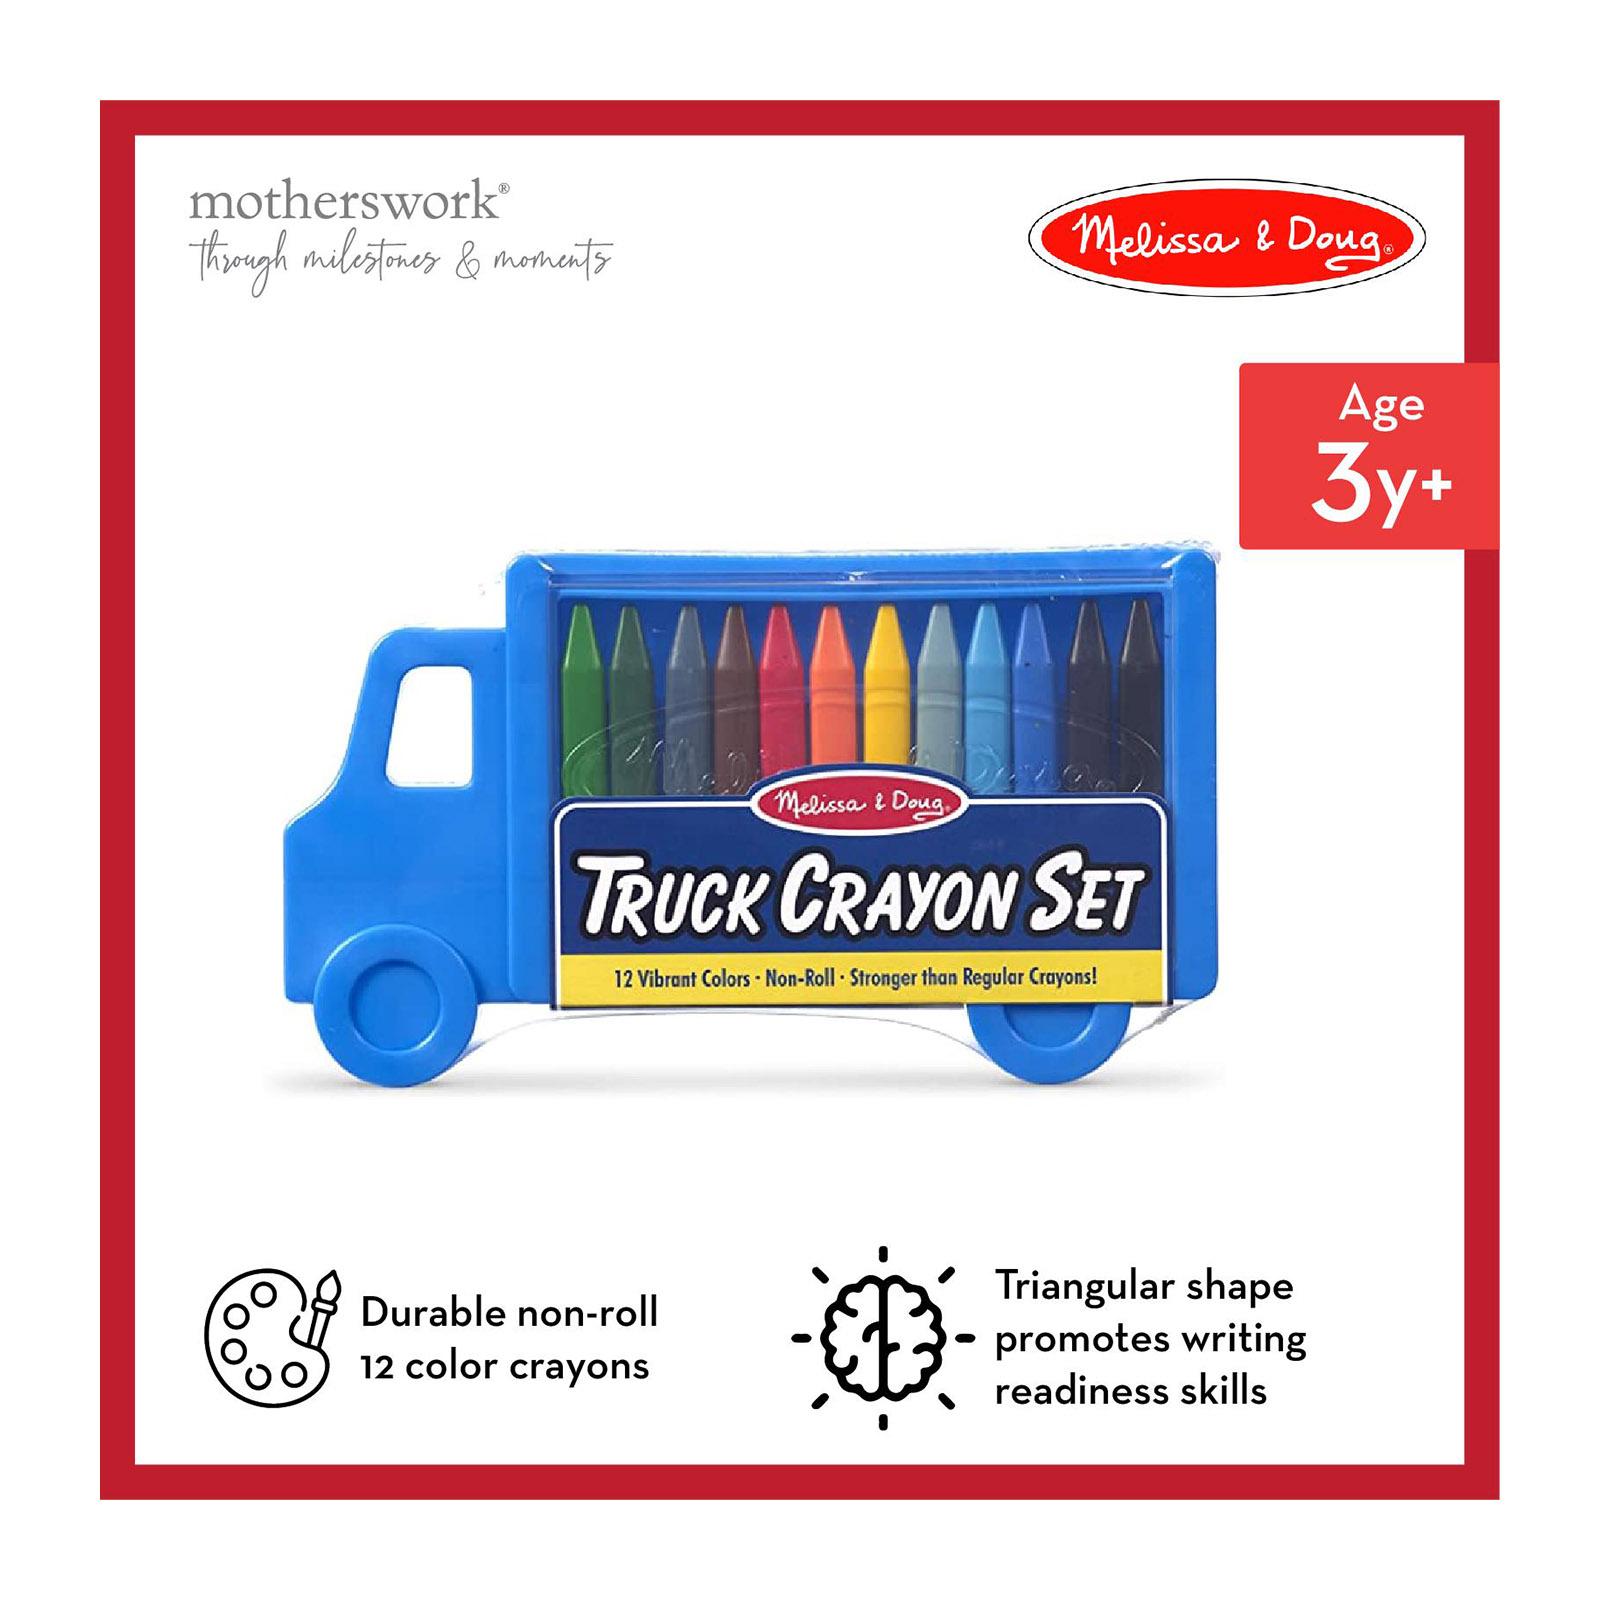 Our Point of View on Melissa & Doug Truck Crayon Set From